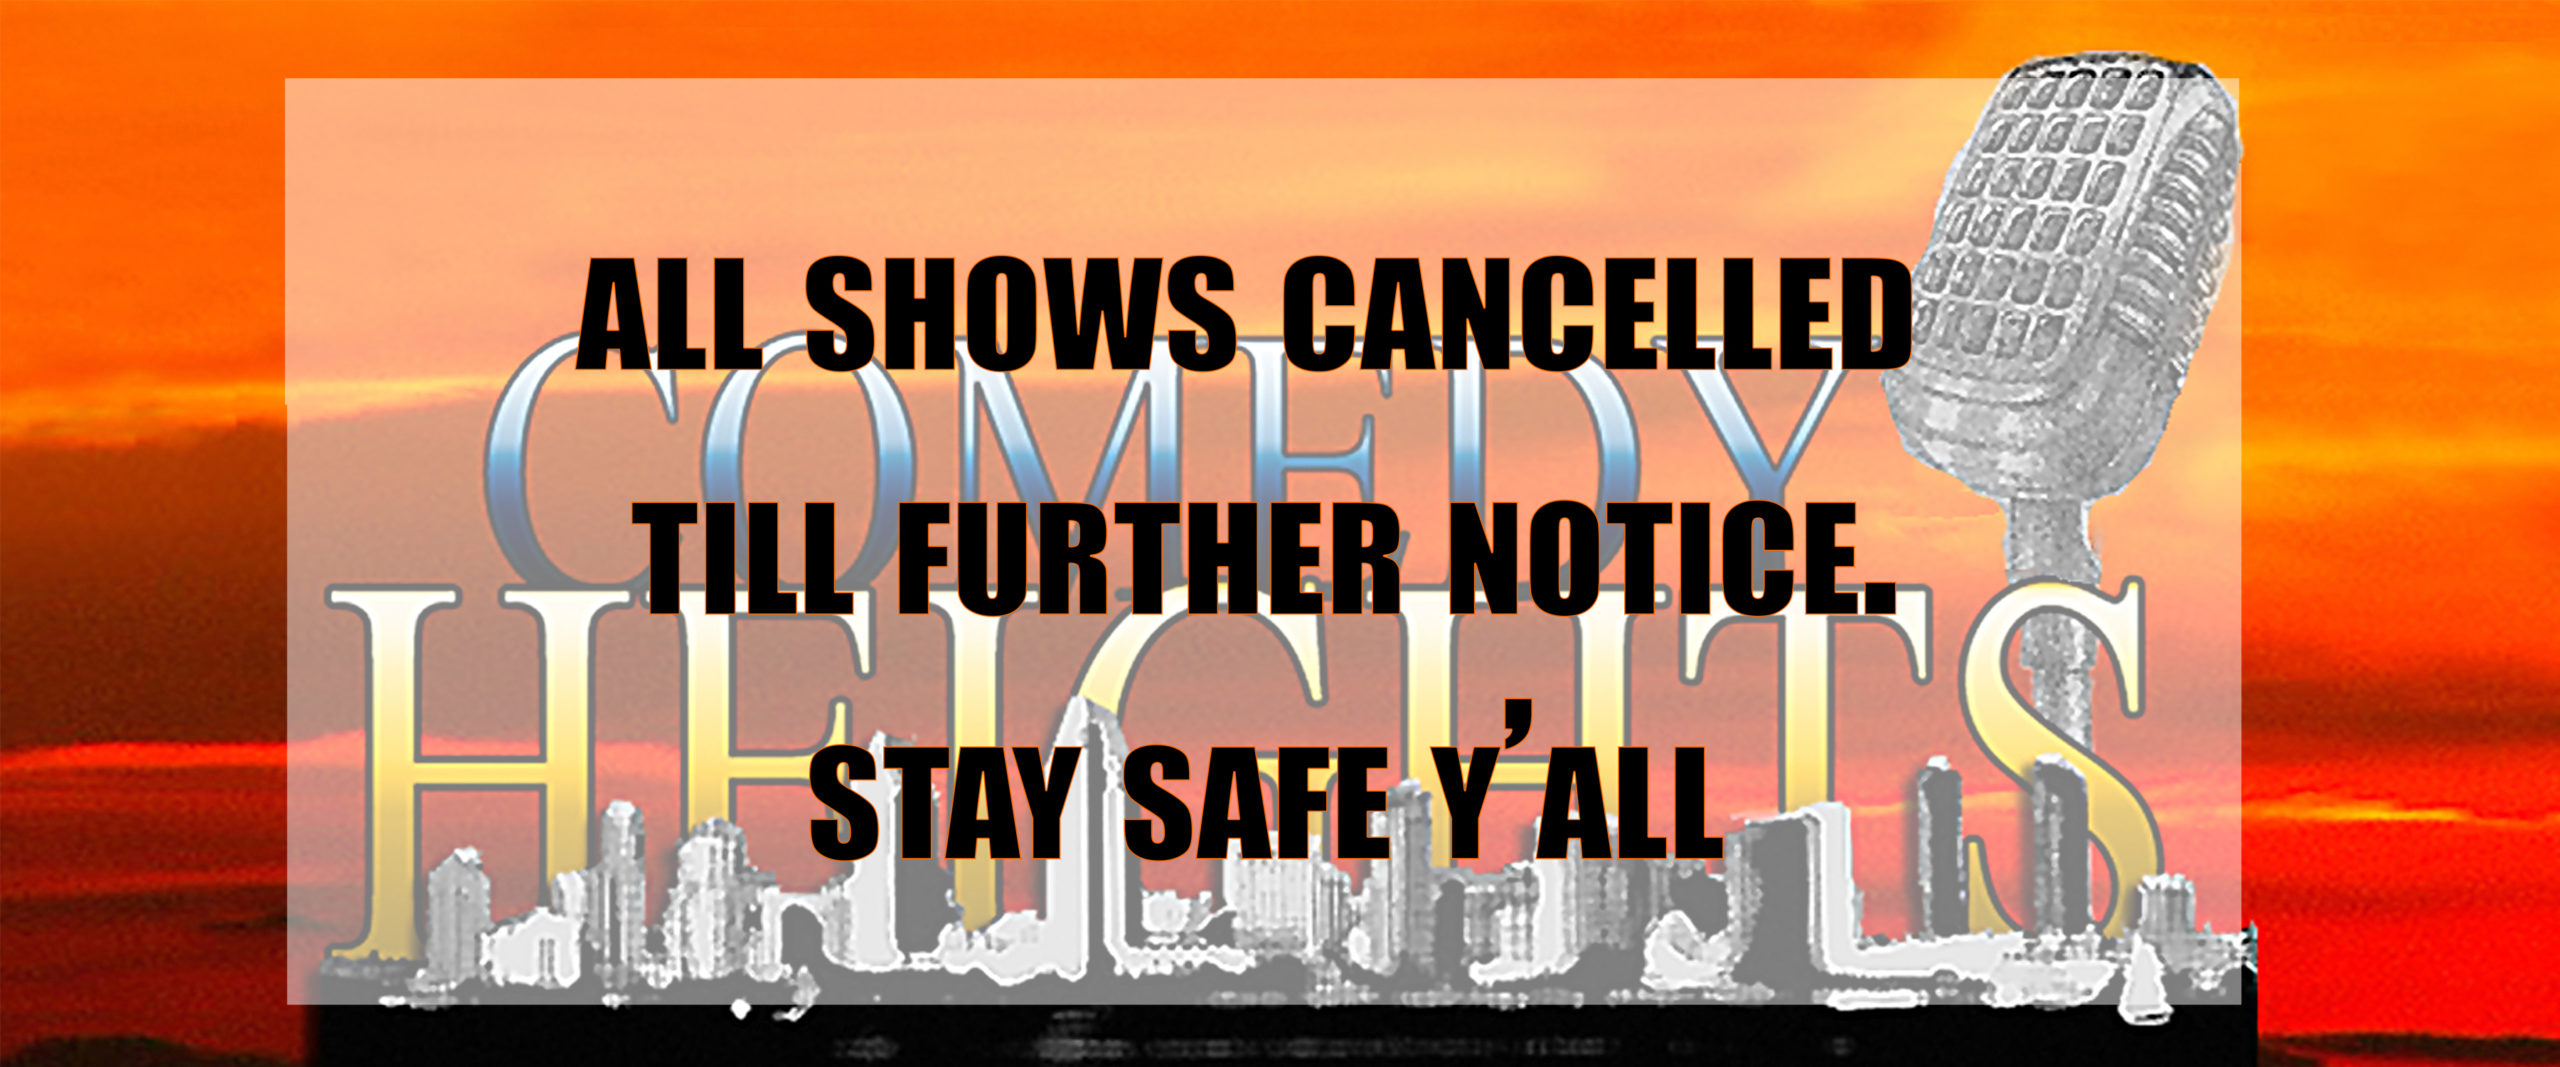 All Comedy Heights Shows Cancelled Until Further Notice